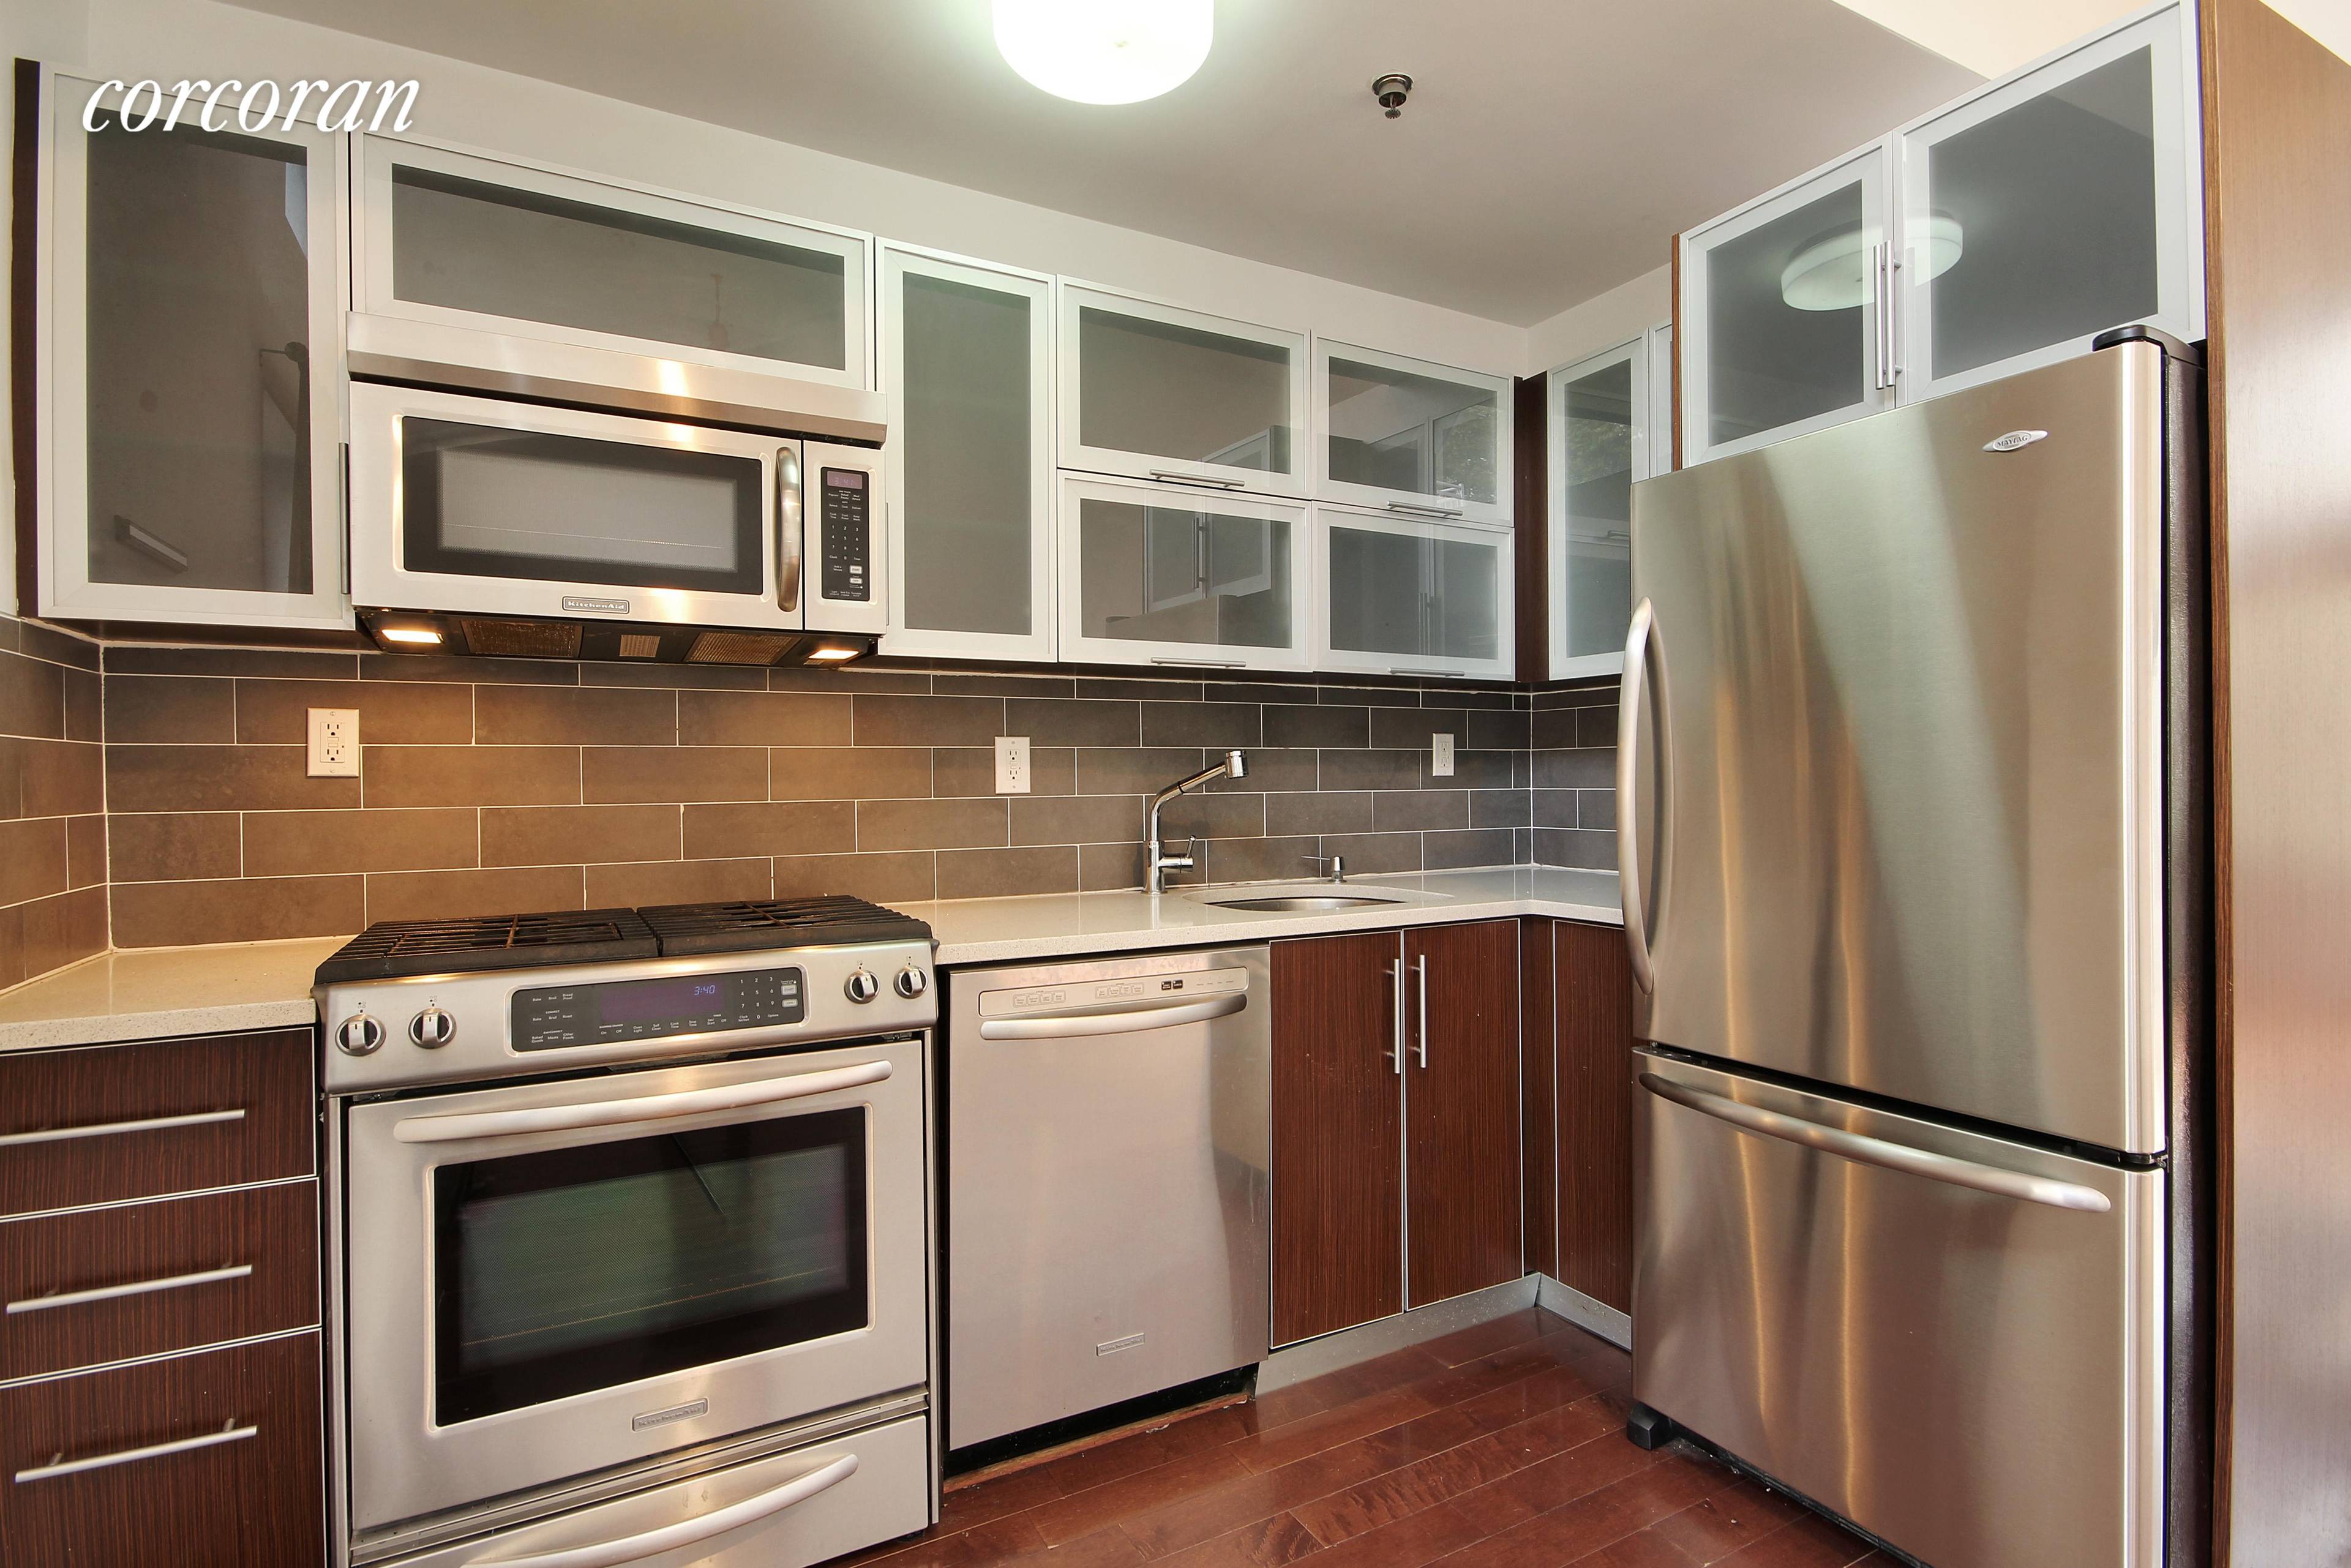 Situated in quaint Windsor Terrace, 138 Seeley Street is a nine unit boutique rental complex.